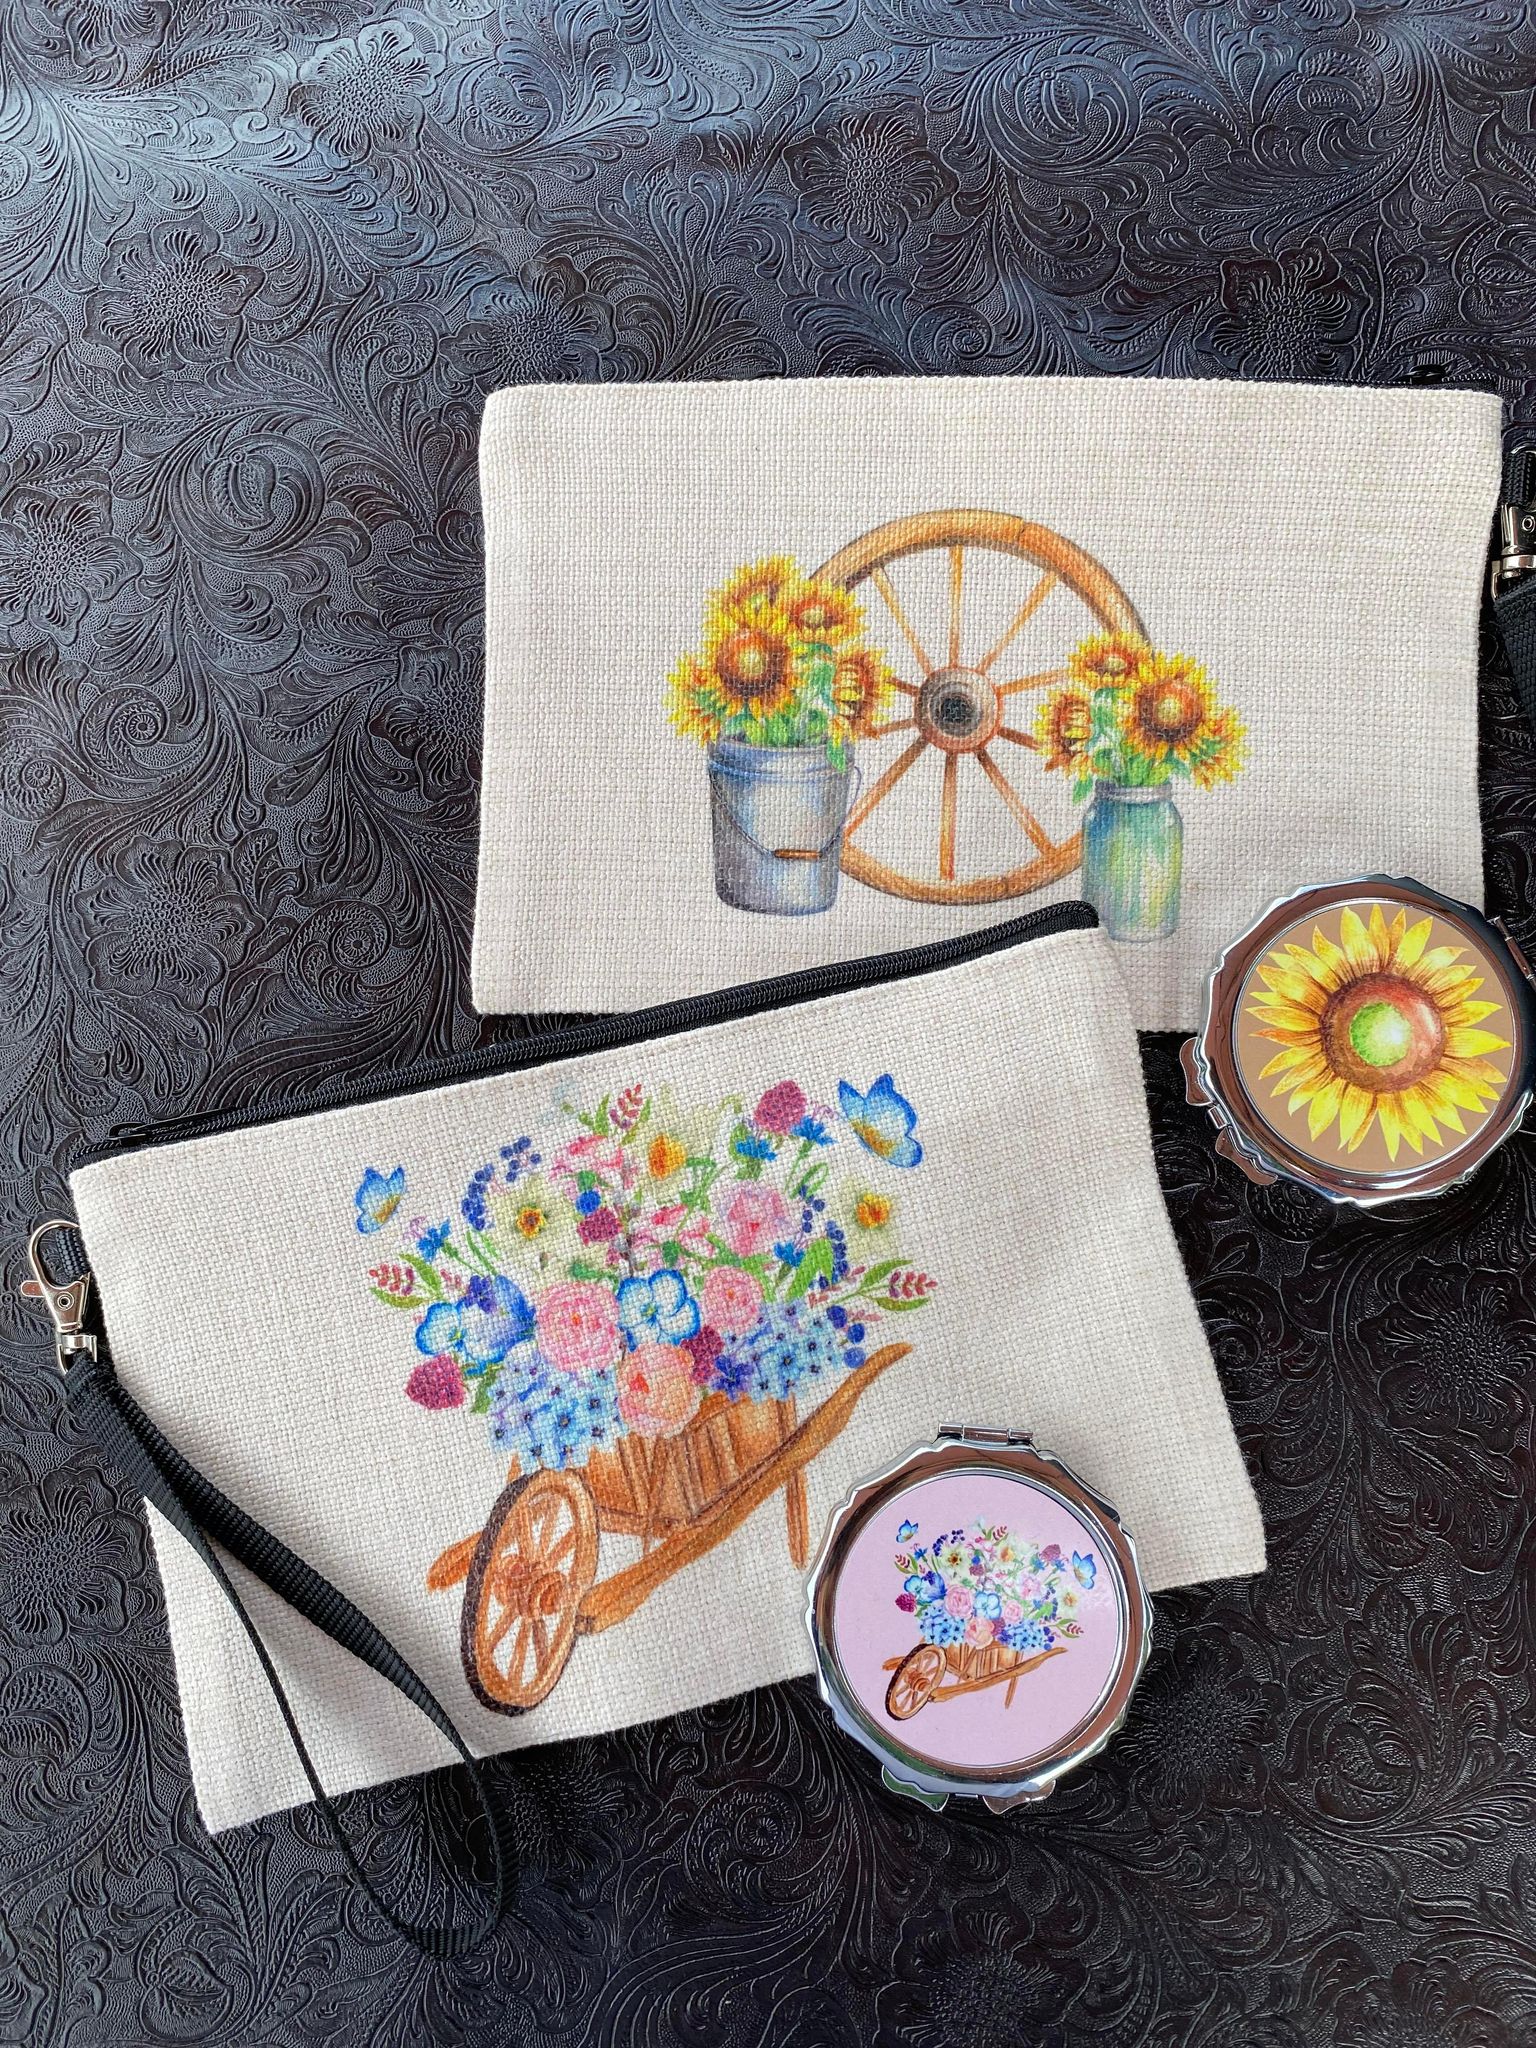 These bags are great hit when paired with a coordinating compact mirror.   